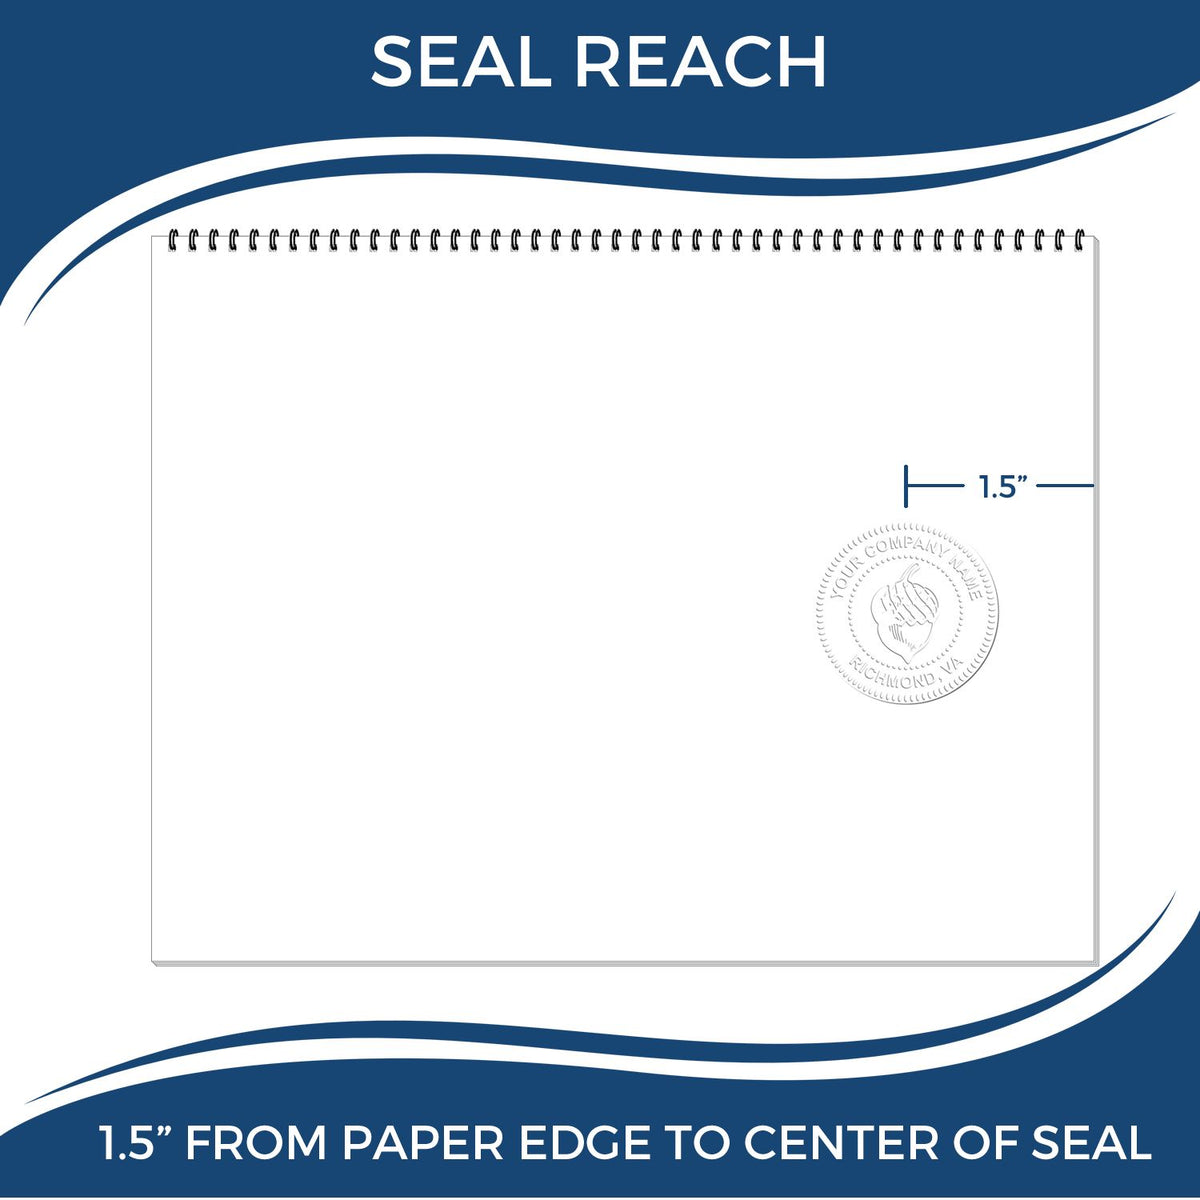 An infographic showing the seal reach which is represented by a ruler and a miniature seal image of the Hybrid Guam Engineer Seal